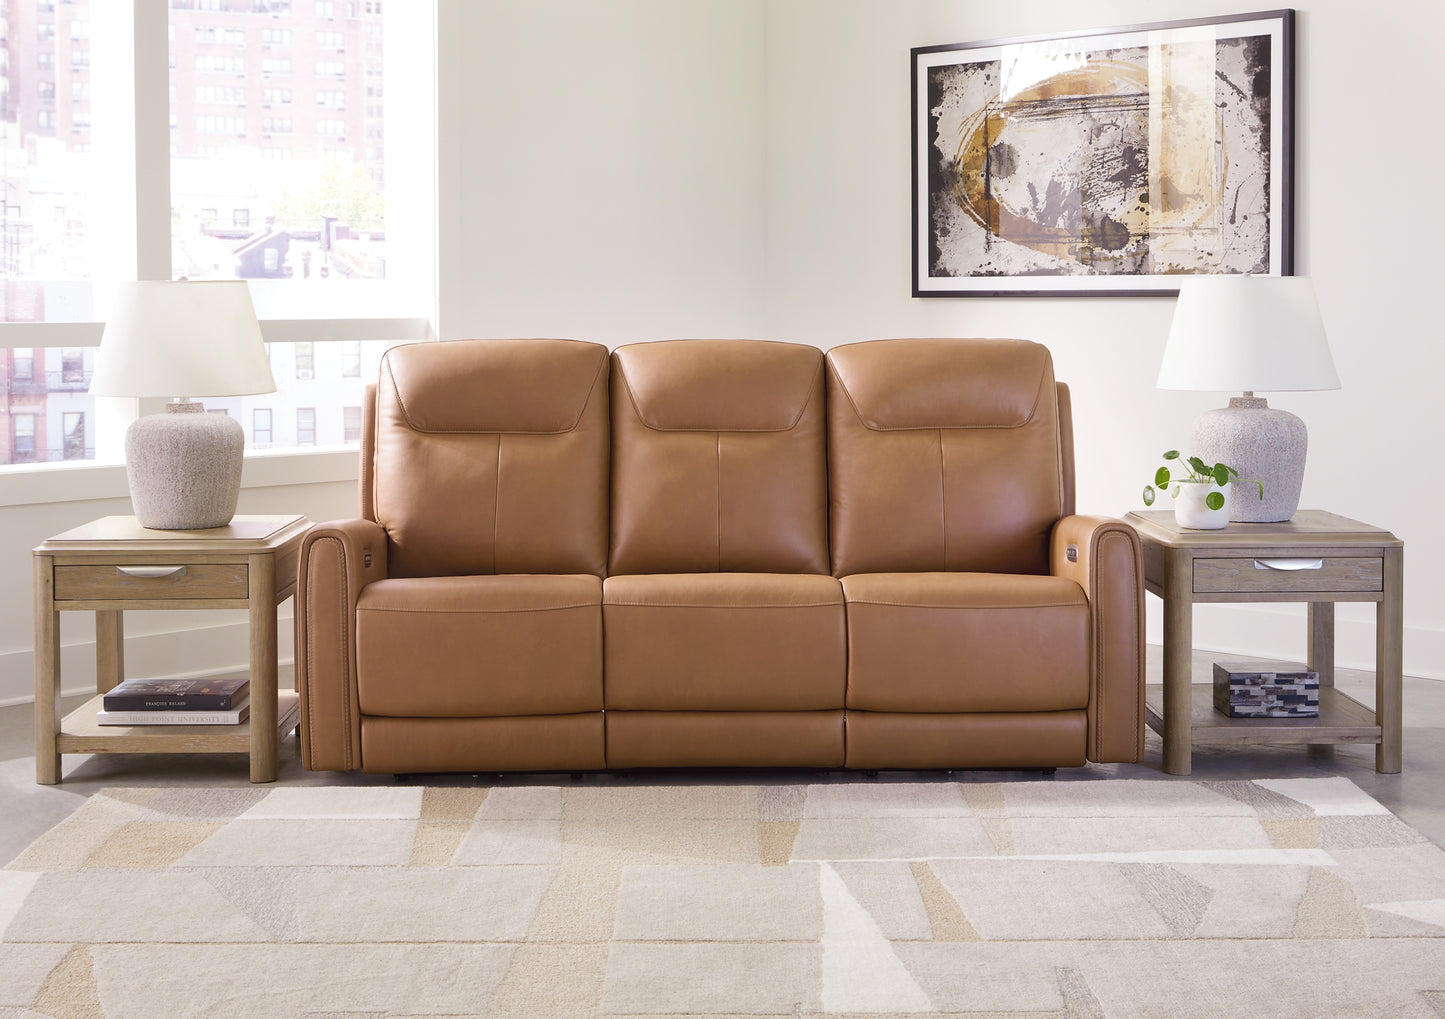 Tryanny Sofa, Loveseat and Recliner Signature Design by Ashley®